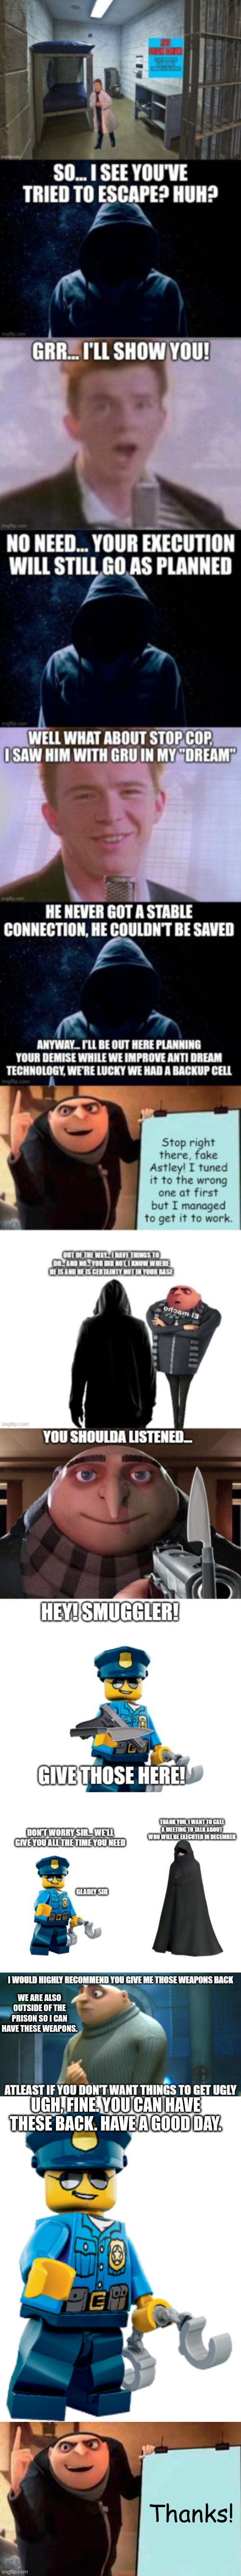 WE ARE ALSO OUTSIDE OF THE PRISON SO I CAN HAVE THESE WEAPONS. UGH, FINE. YOU CAN HAVE THESE BACK. HAVE A GOOD DAY. Thanks! | image tagged in police officer,memes,gru's plan | made w/ Imgflip meme maker